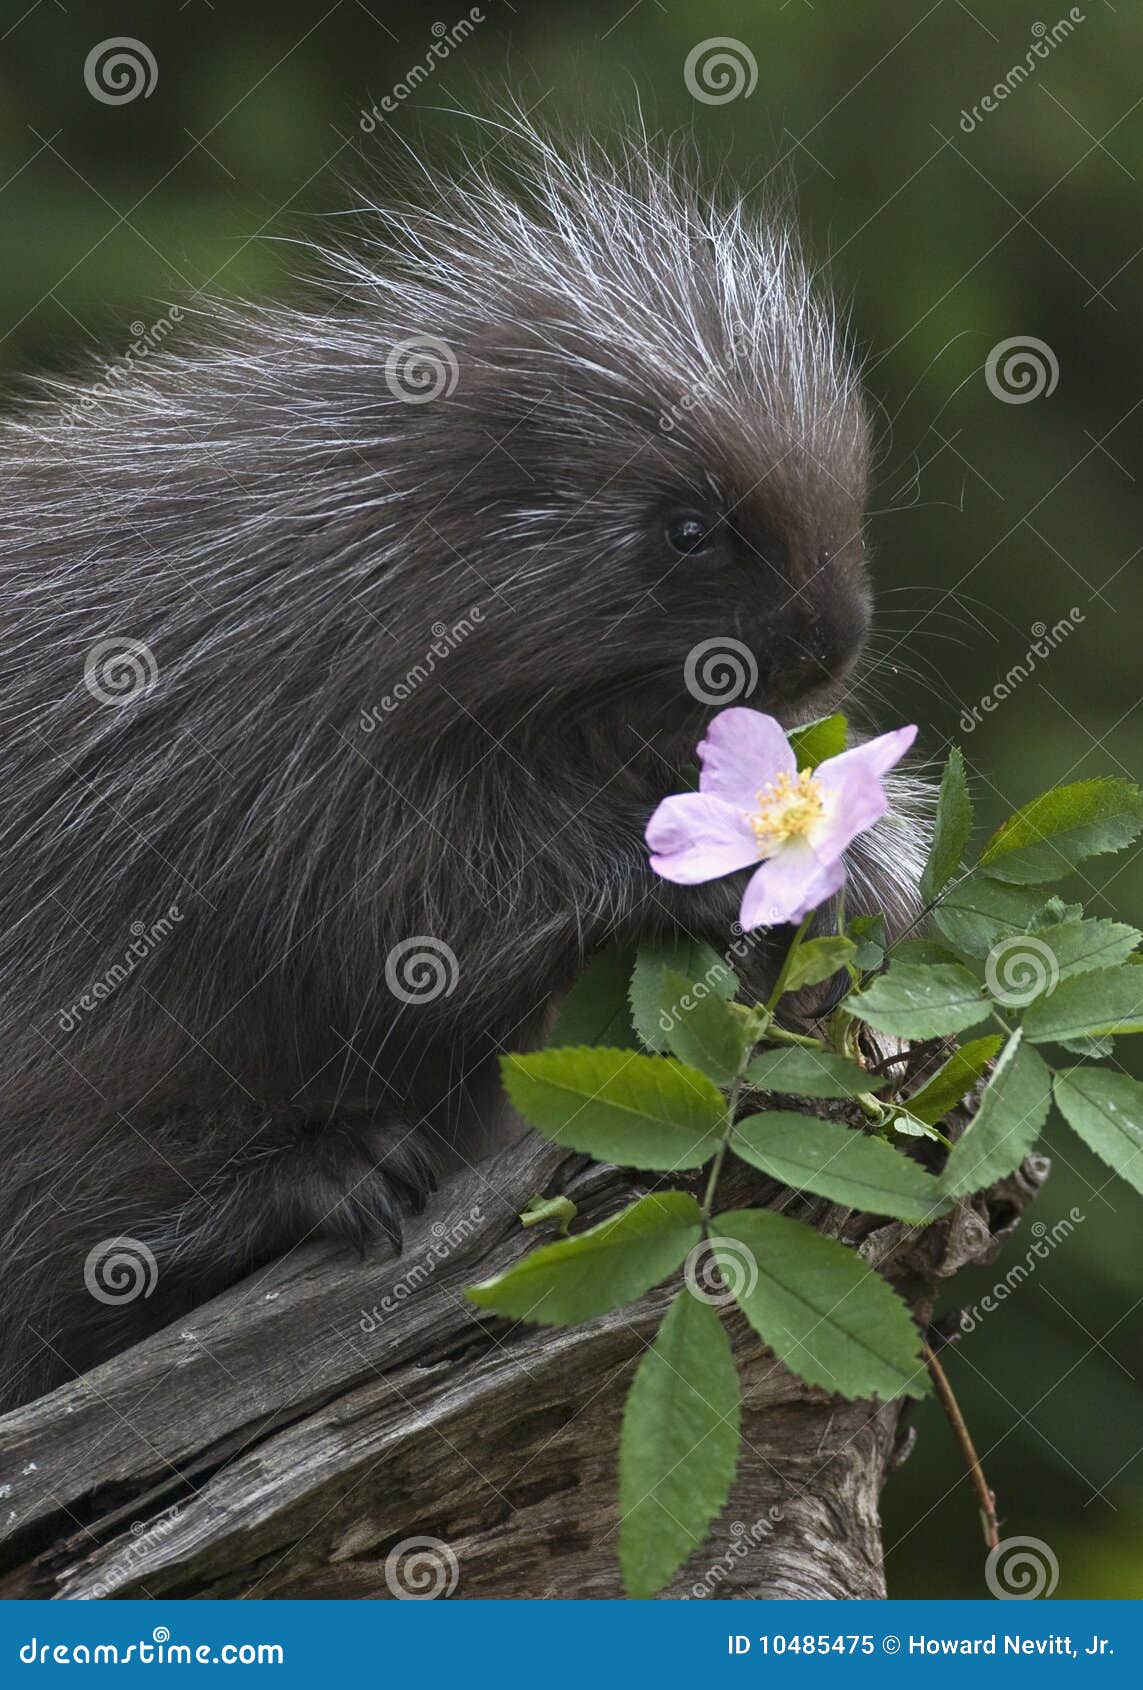 baby porcupine and pink flower